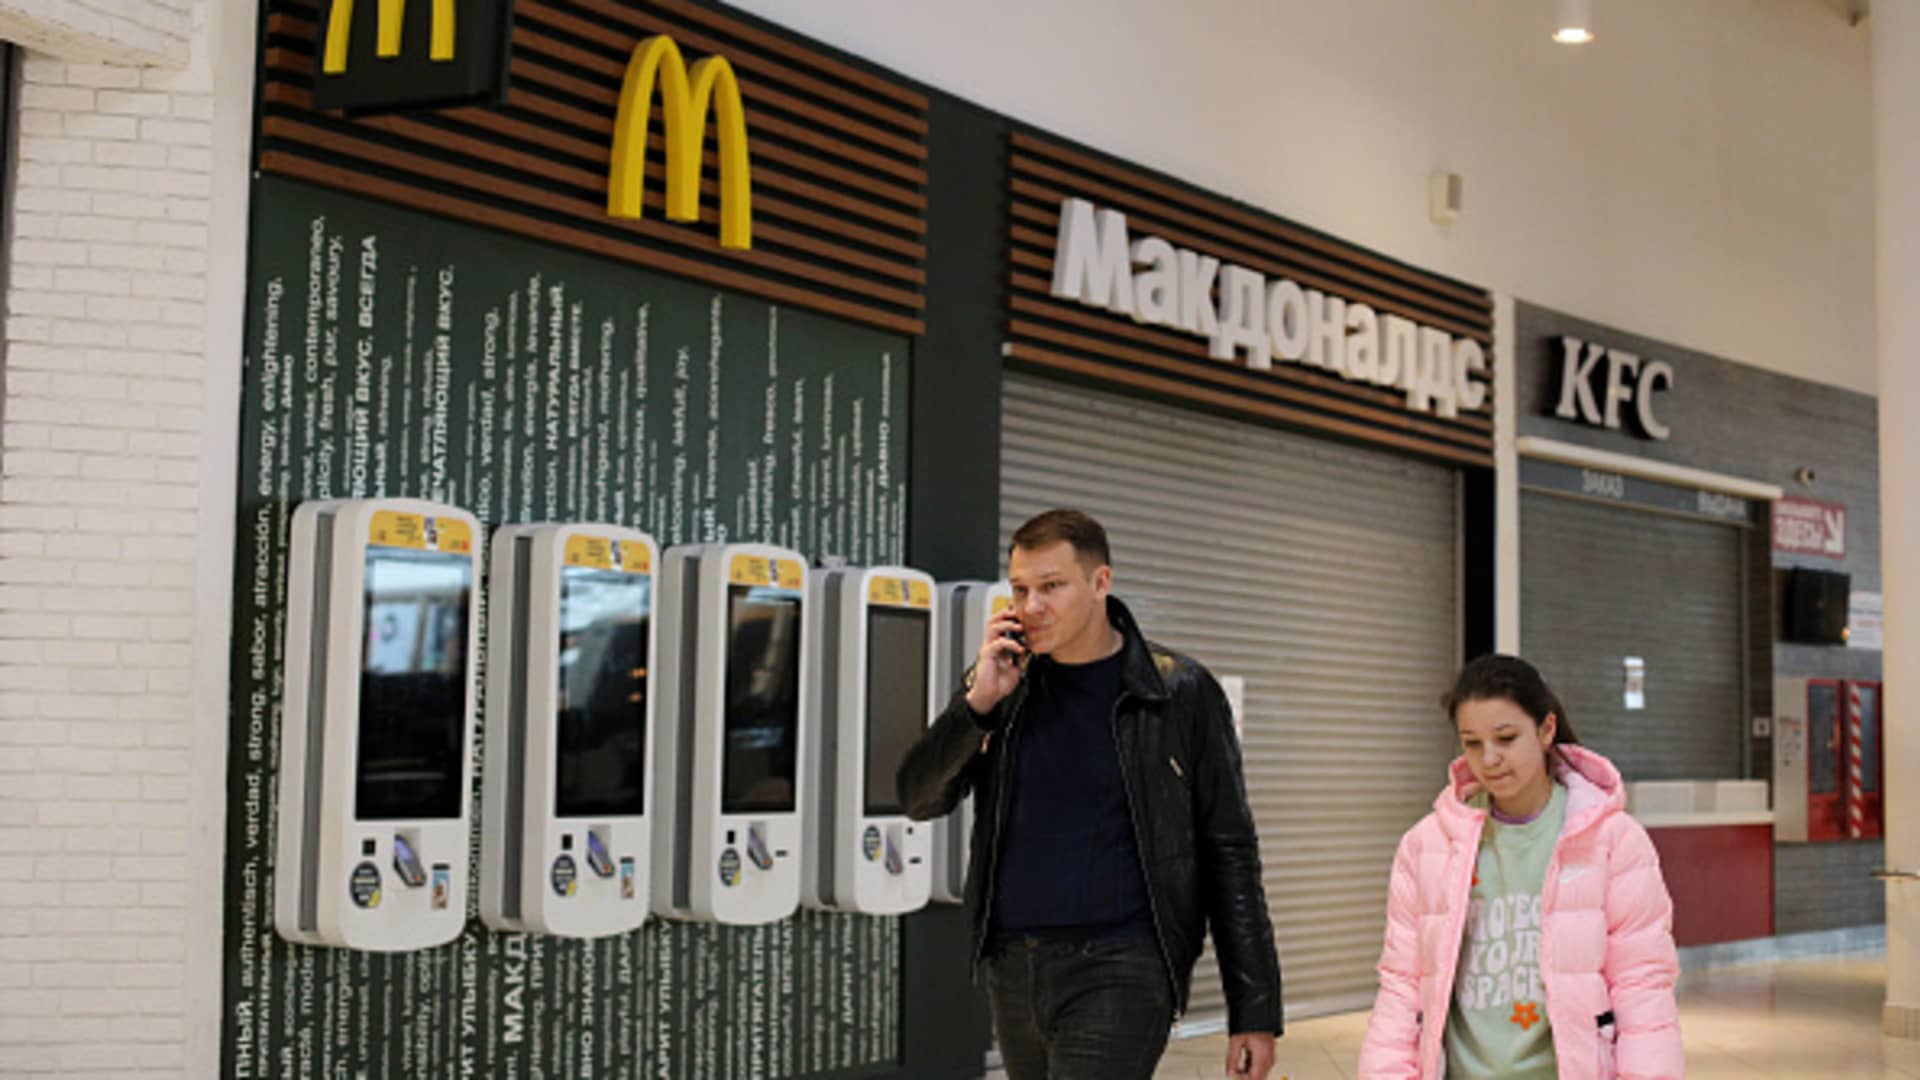 The logo of the closed McDonald's restaurant in the Aviapark shopping center in Moscow.